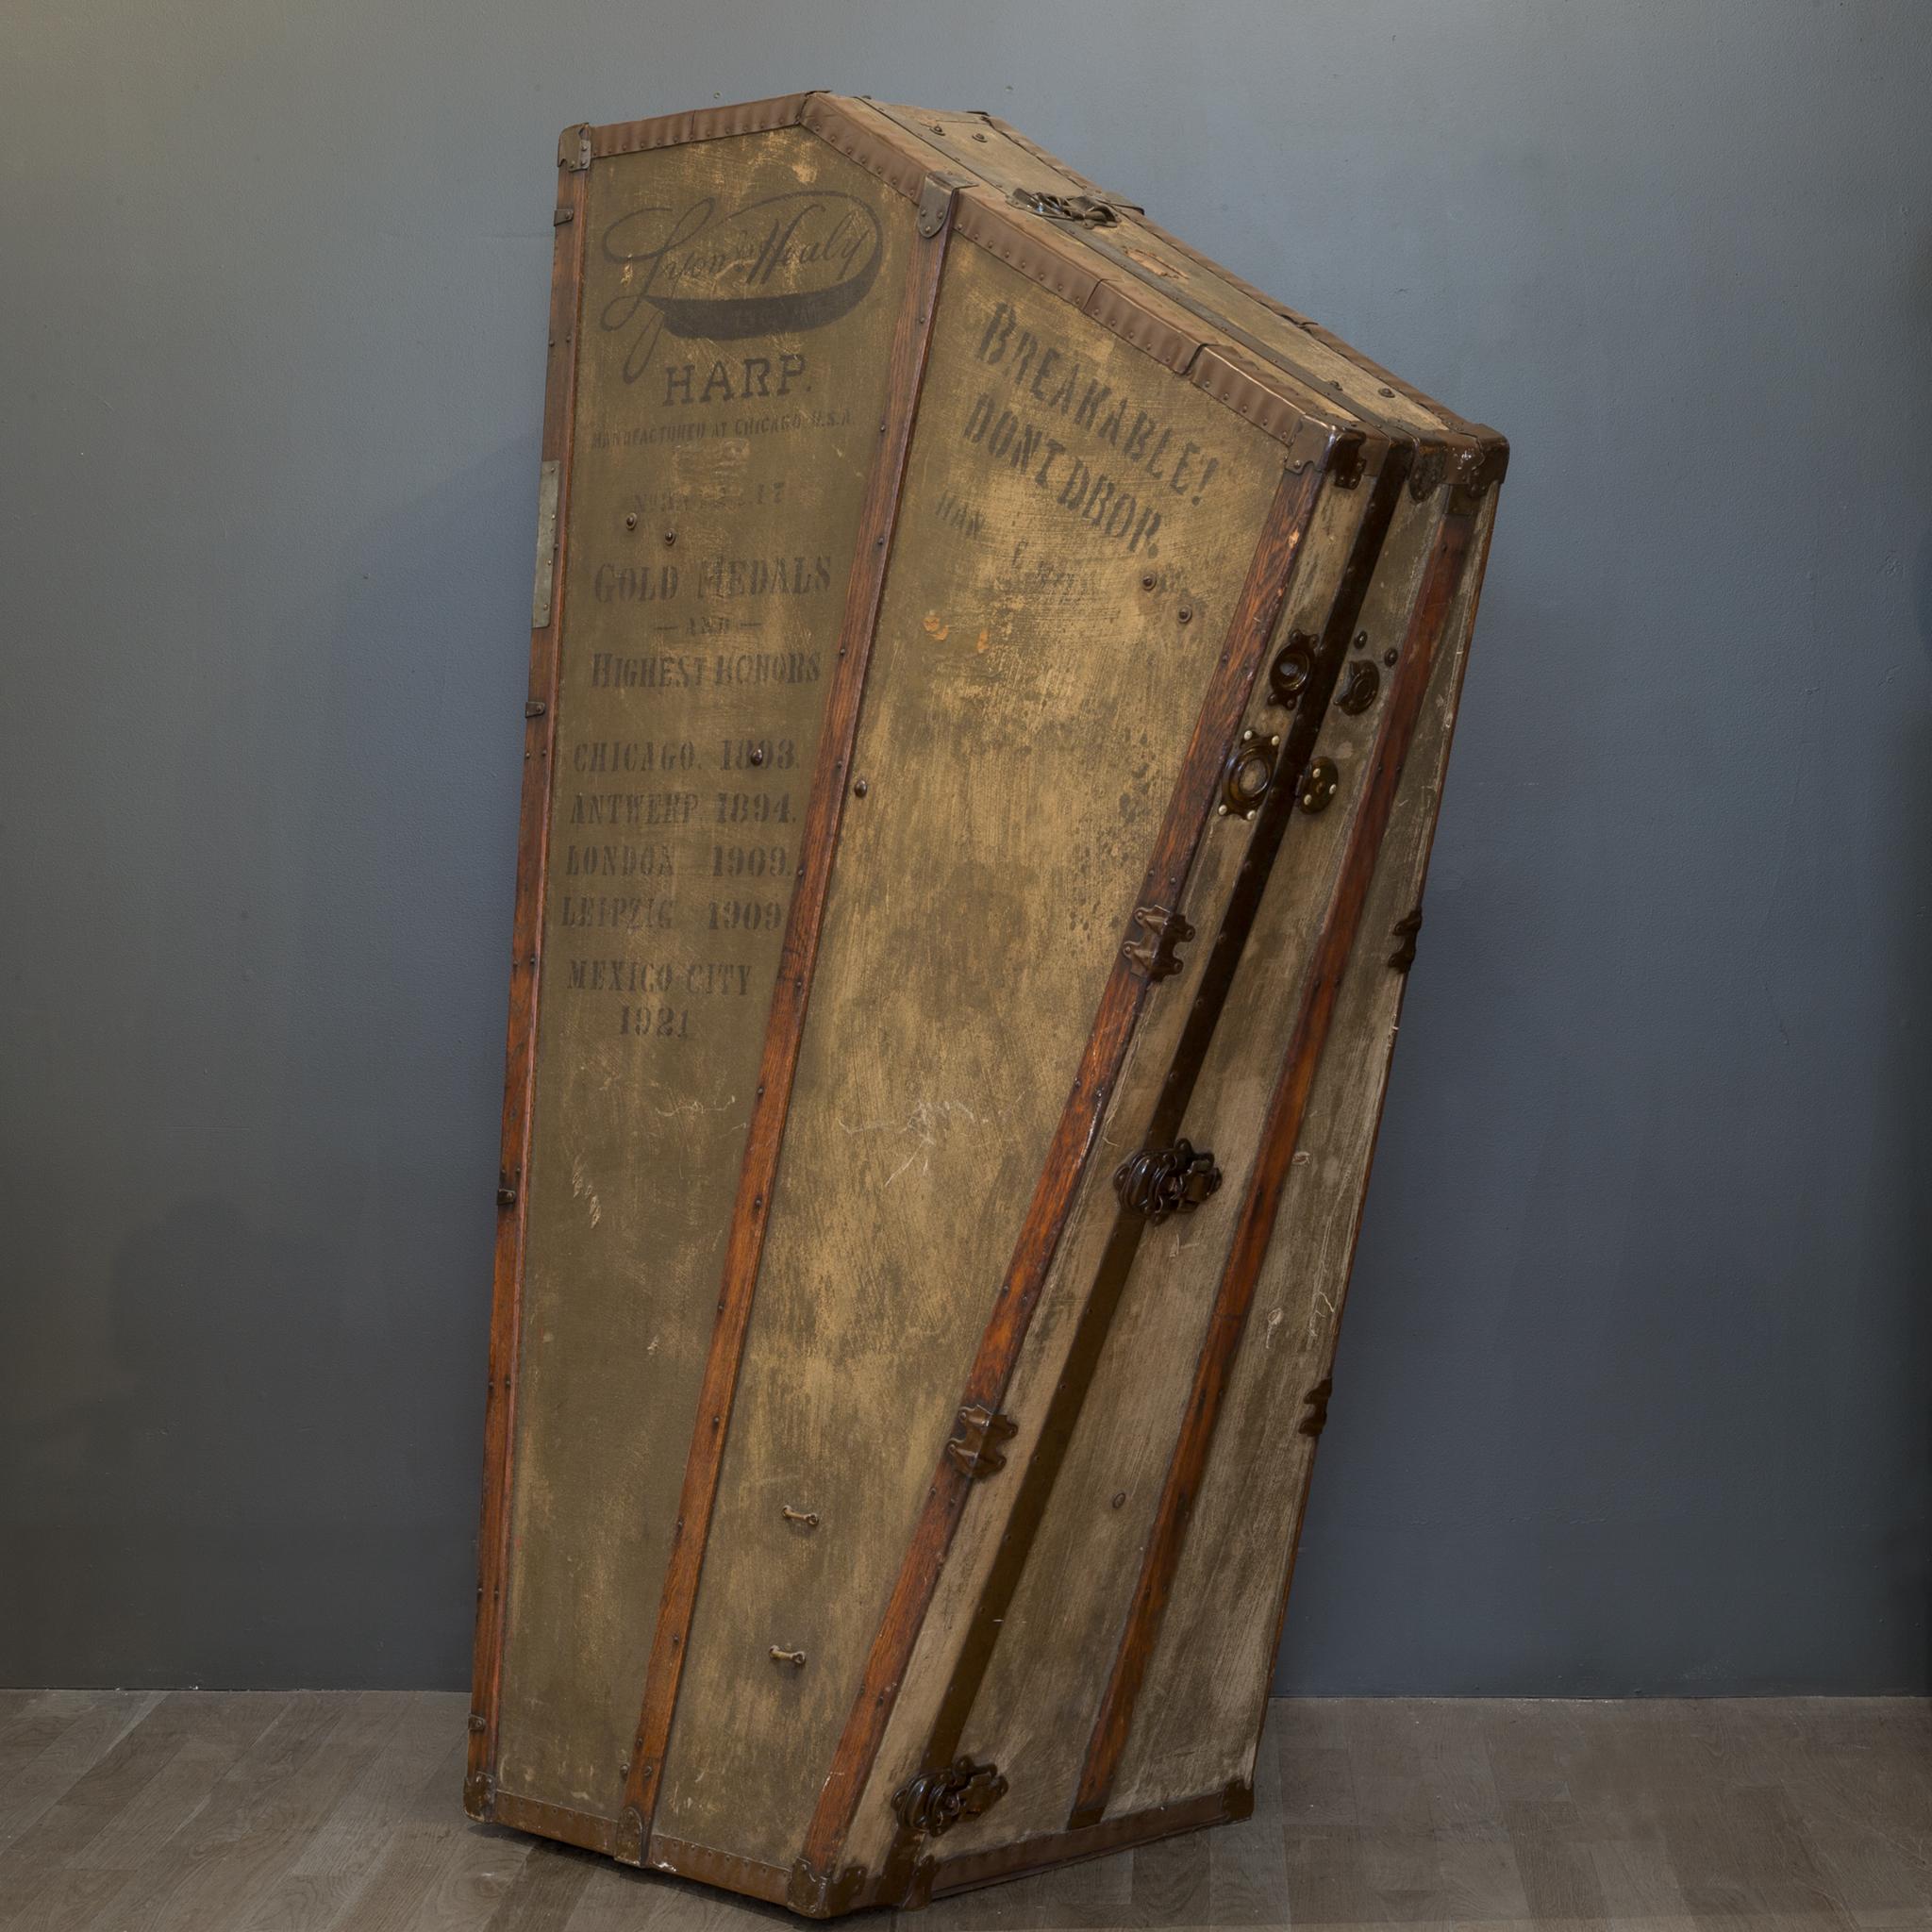 This is an original professional touring harp case. The case is covered in canvas and trimmed in wood and metal cladding. The touring dates and cities are stamped on both sides and range from 1893-1921. The cities vary from London, Leipzig, Chicago